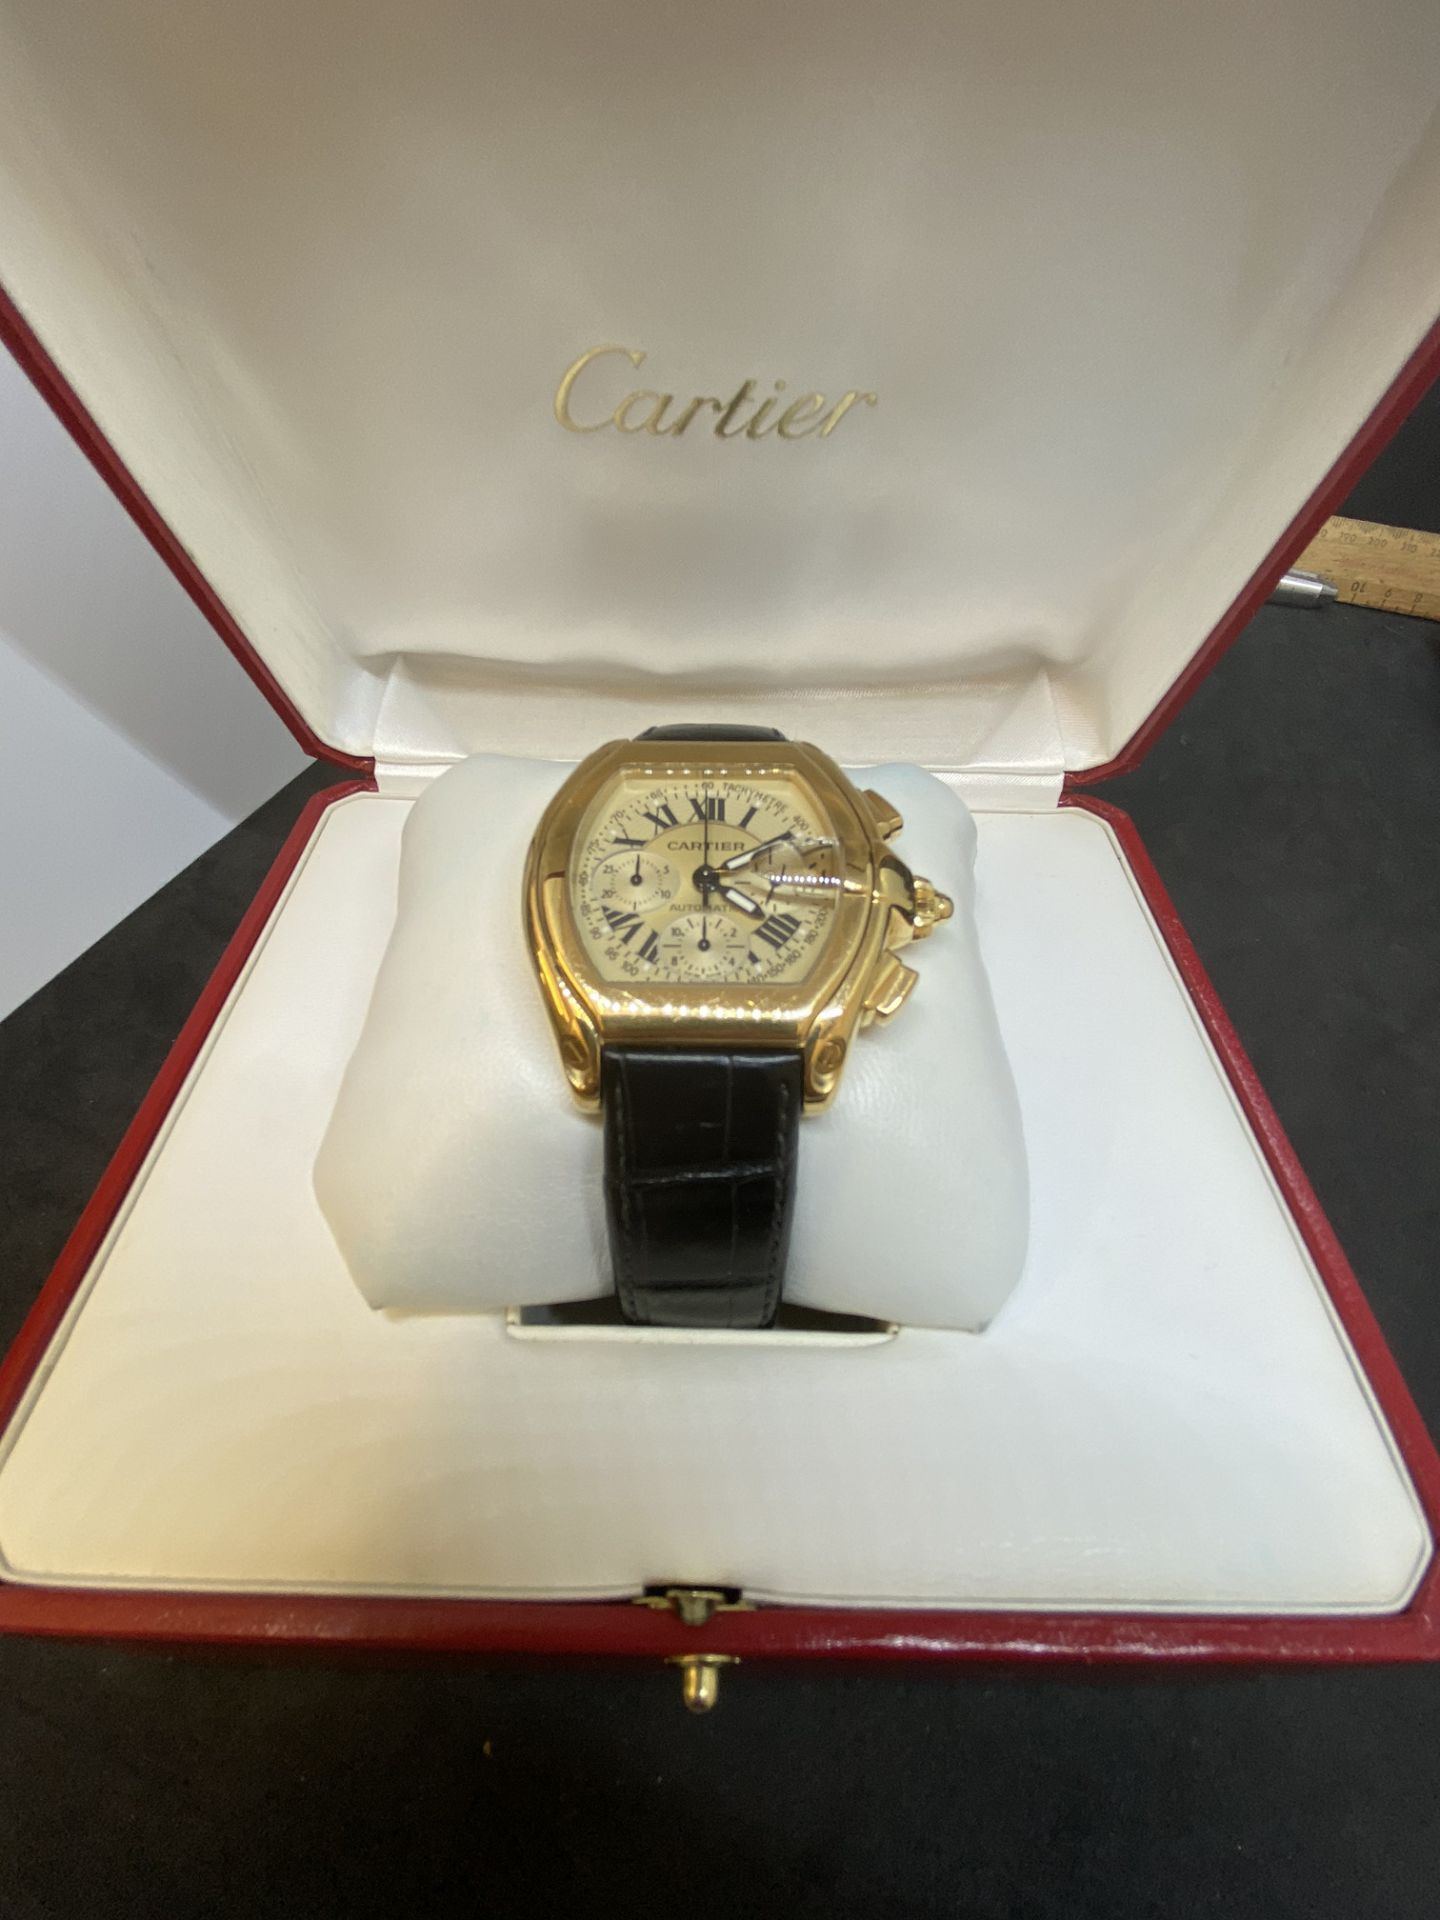 Cartier Roadster Xl Chronograph 2619 Yellow Gold 18k 48mm Automatic Watch with Box